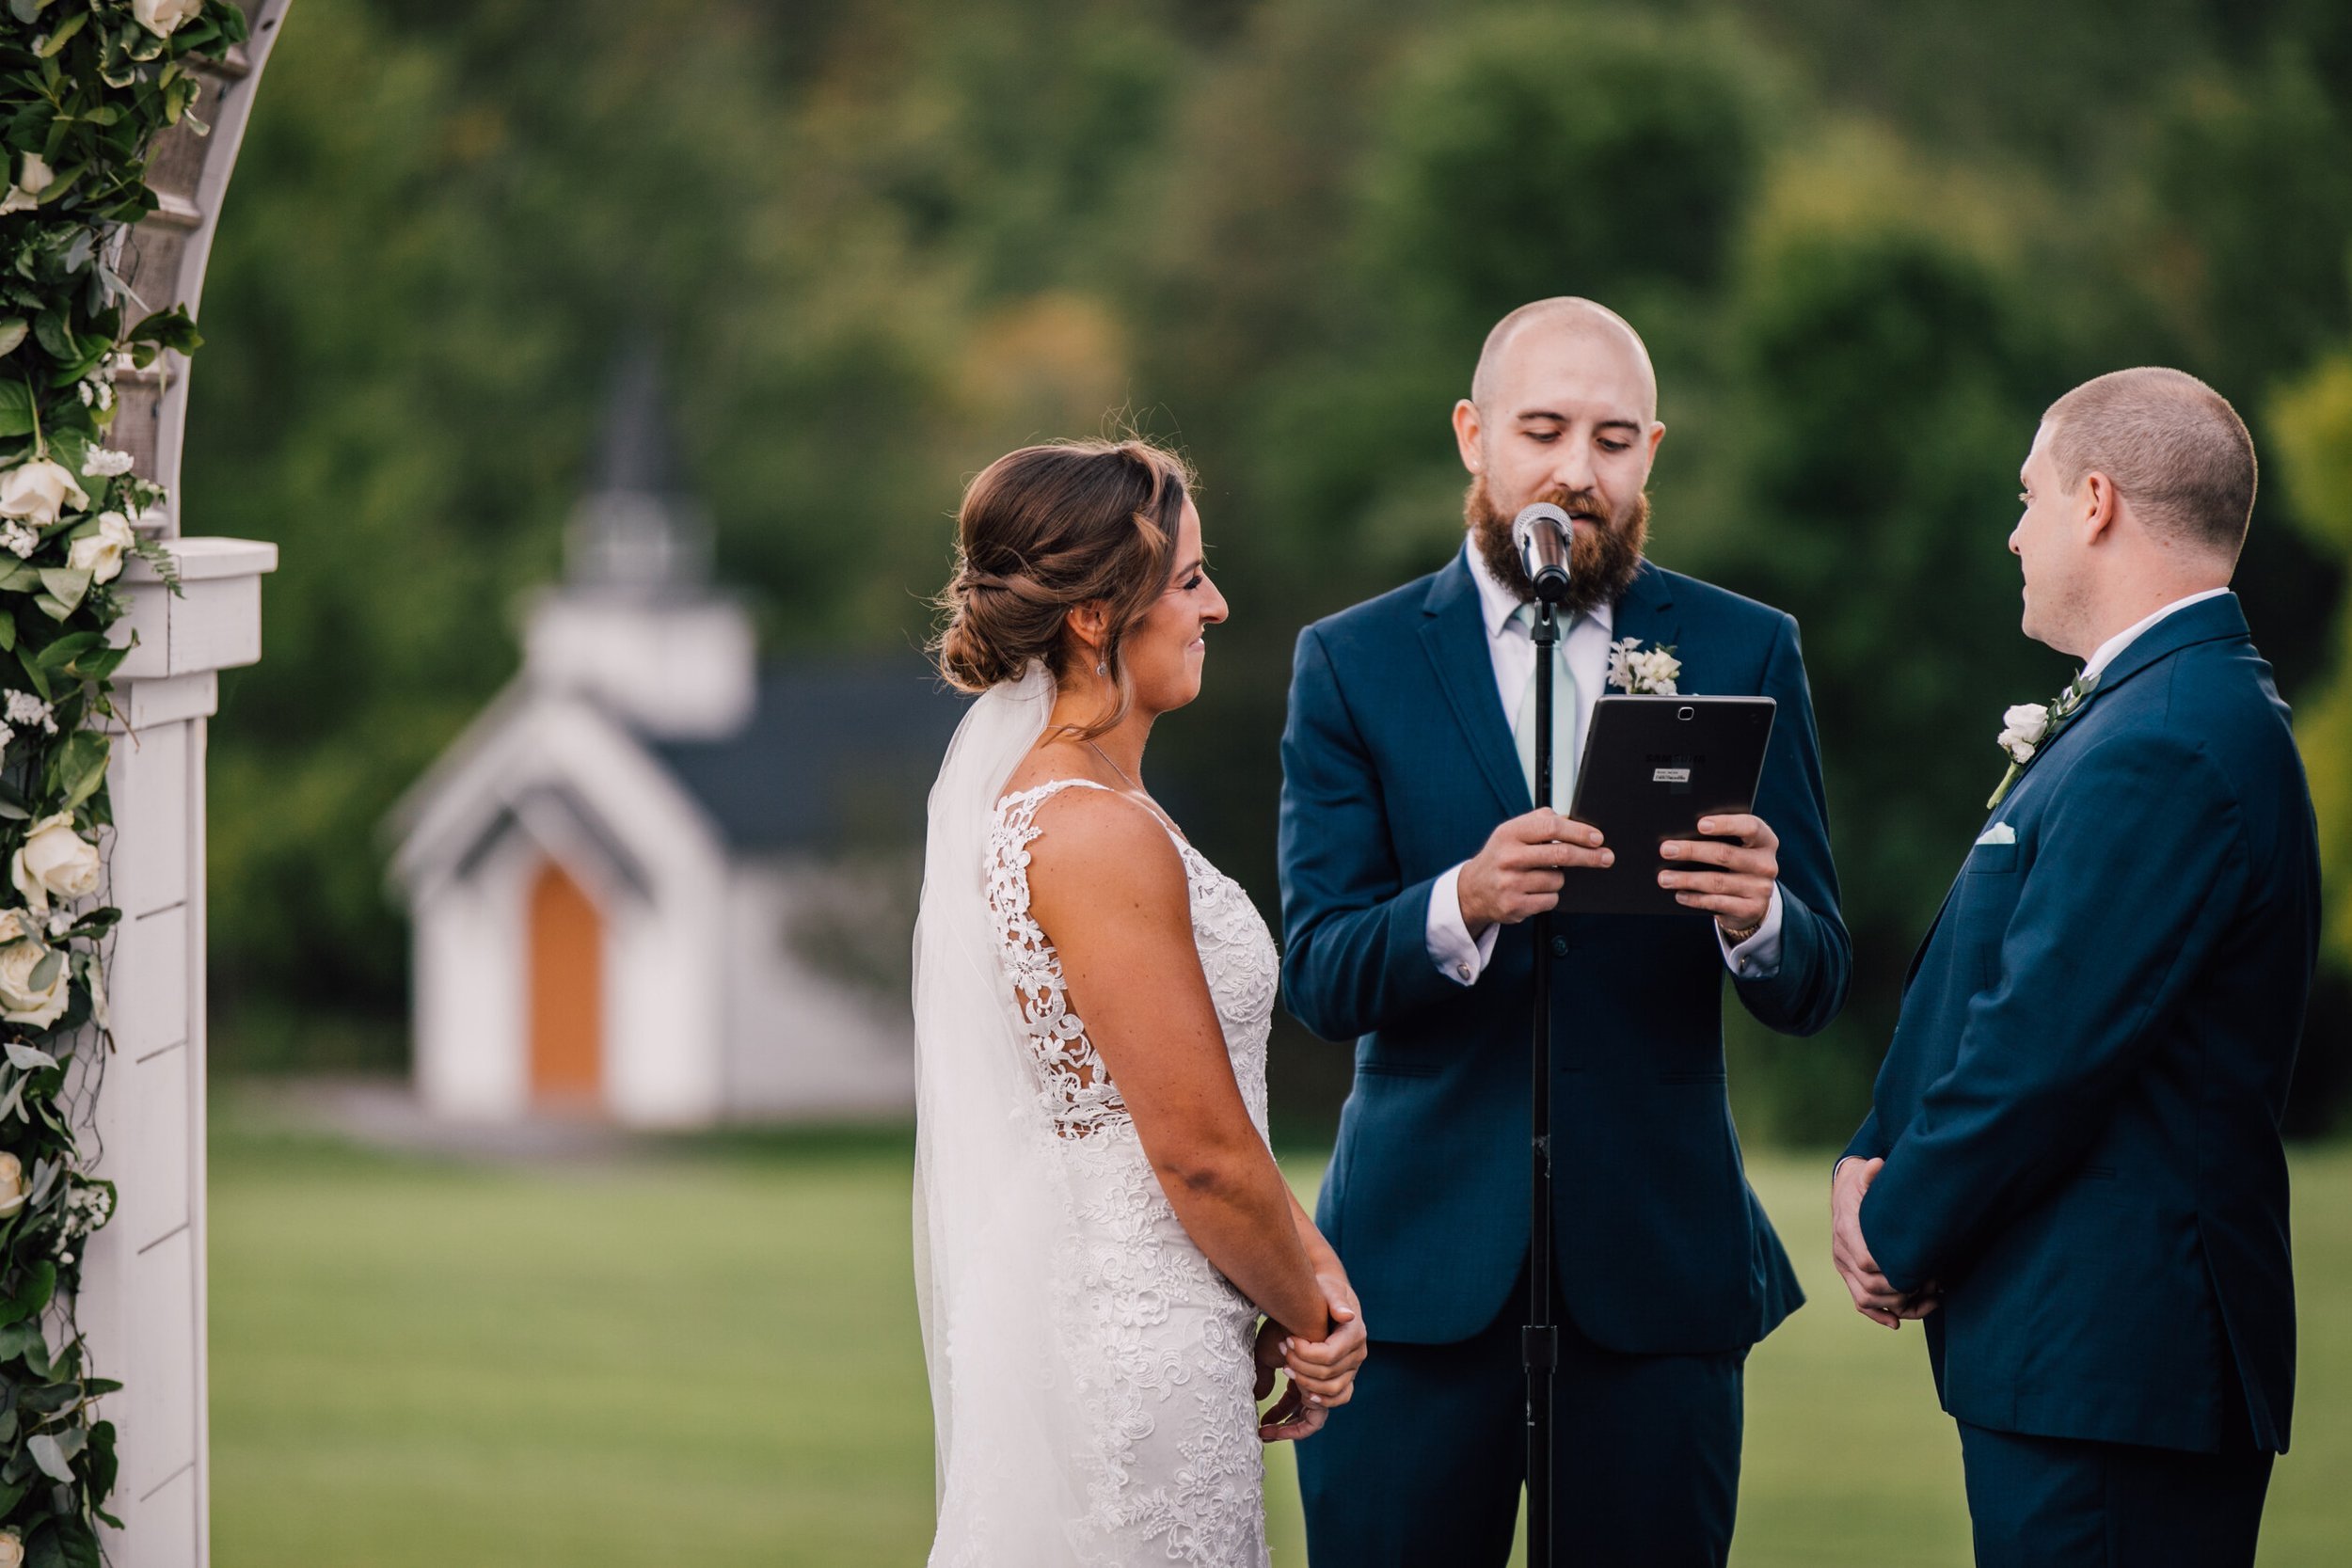  The bride and groom smile as their officiant reads between them during their ceremony 